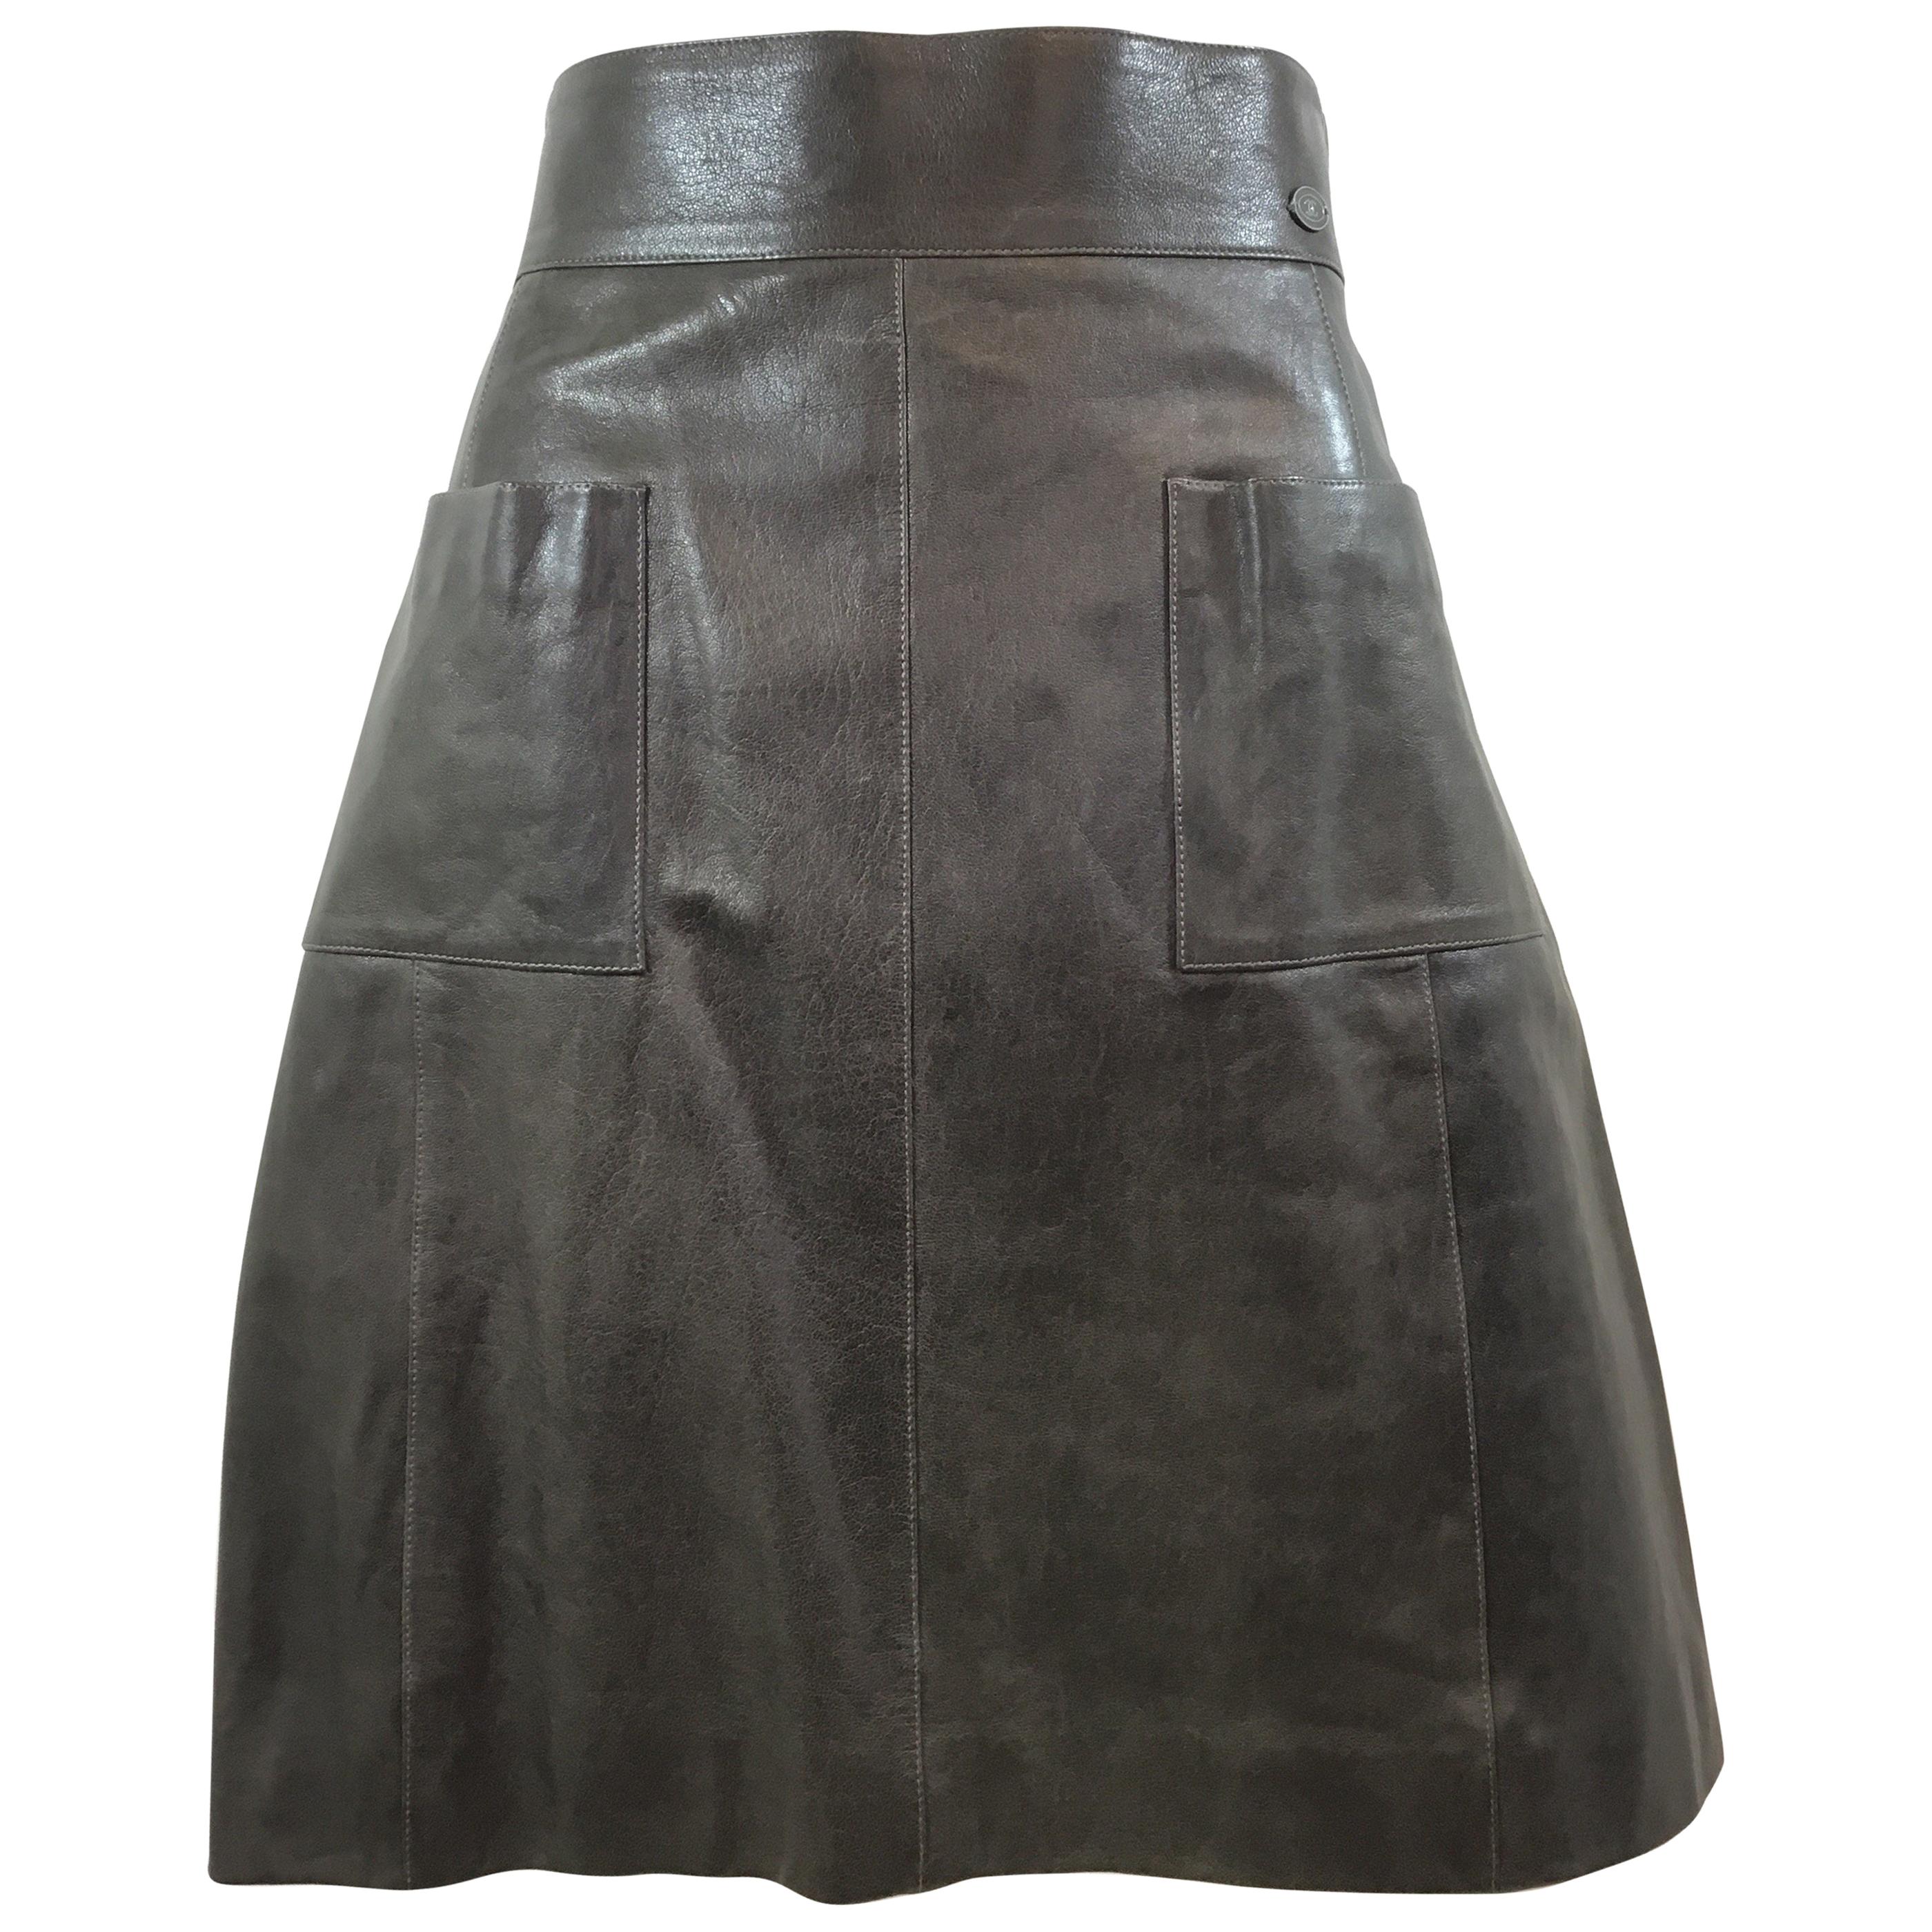 Chanel 2007 A Lambskin Leather Skirt